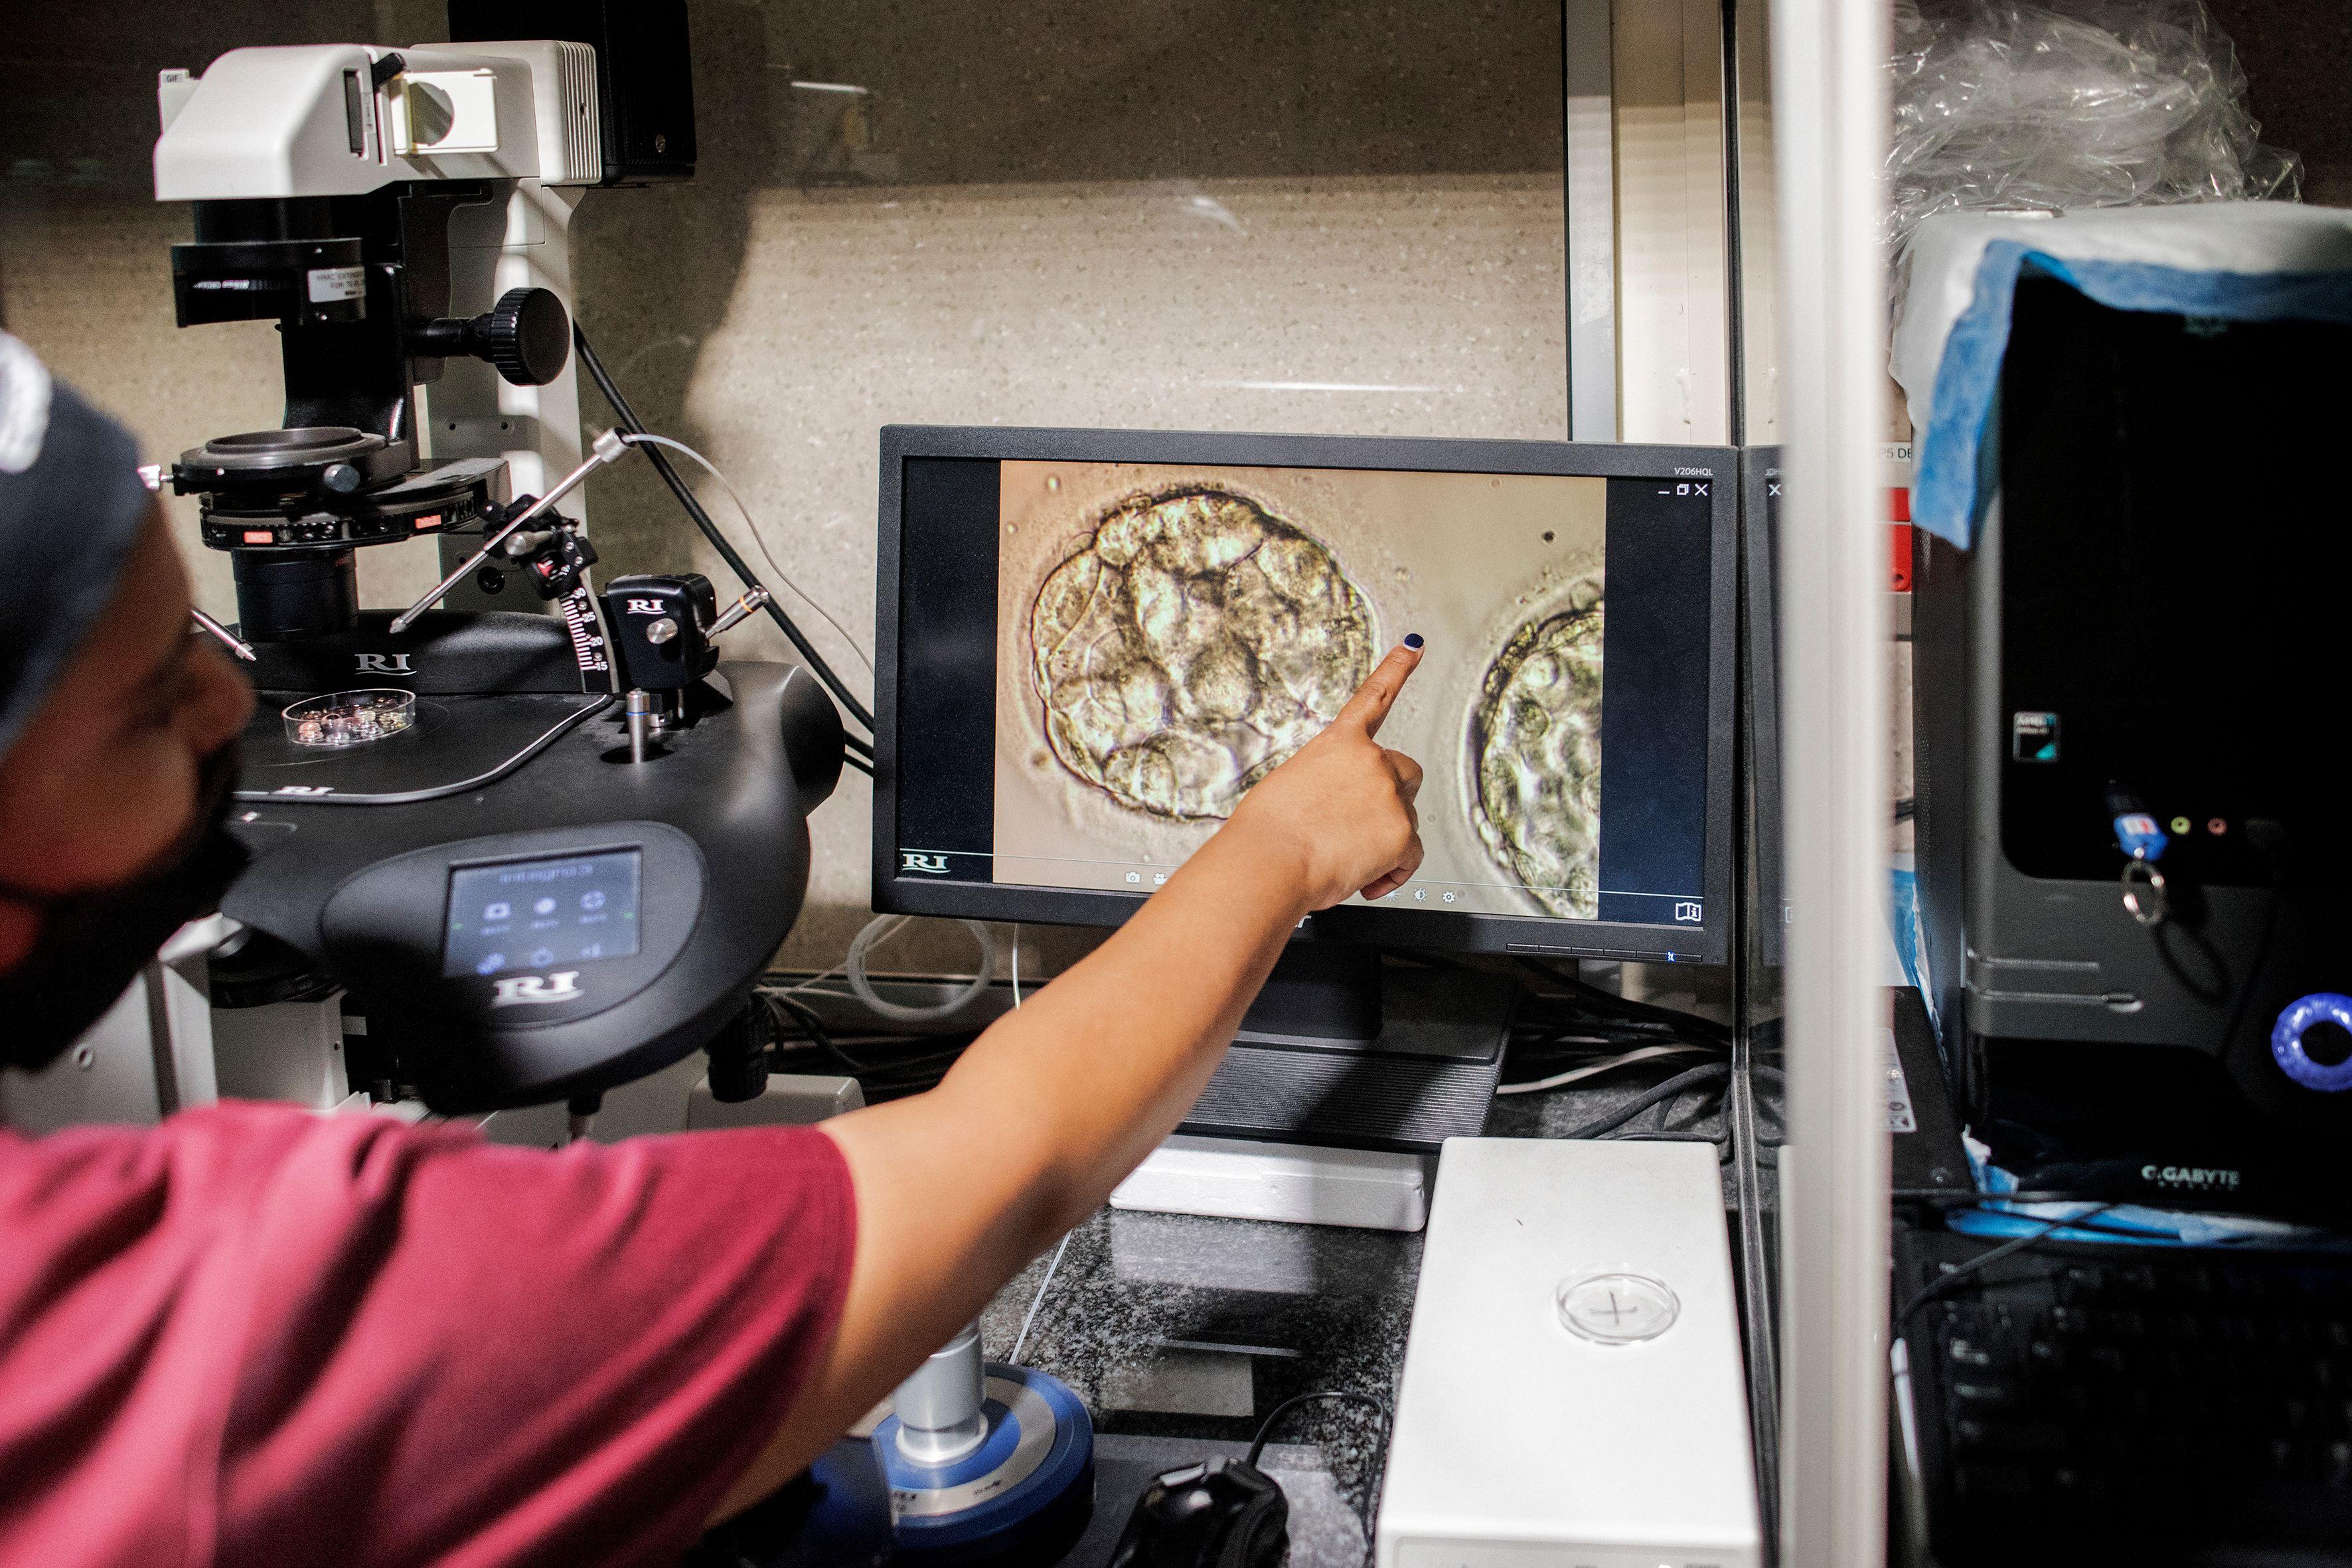 A person in scrubs points to blastocysts shown on a monitor surrounded by equipment in a fertility clinic lab